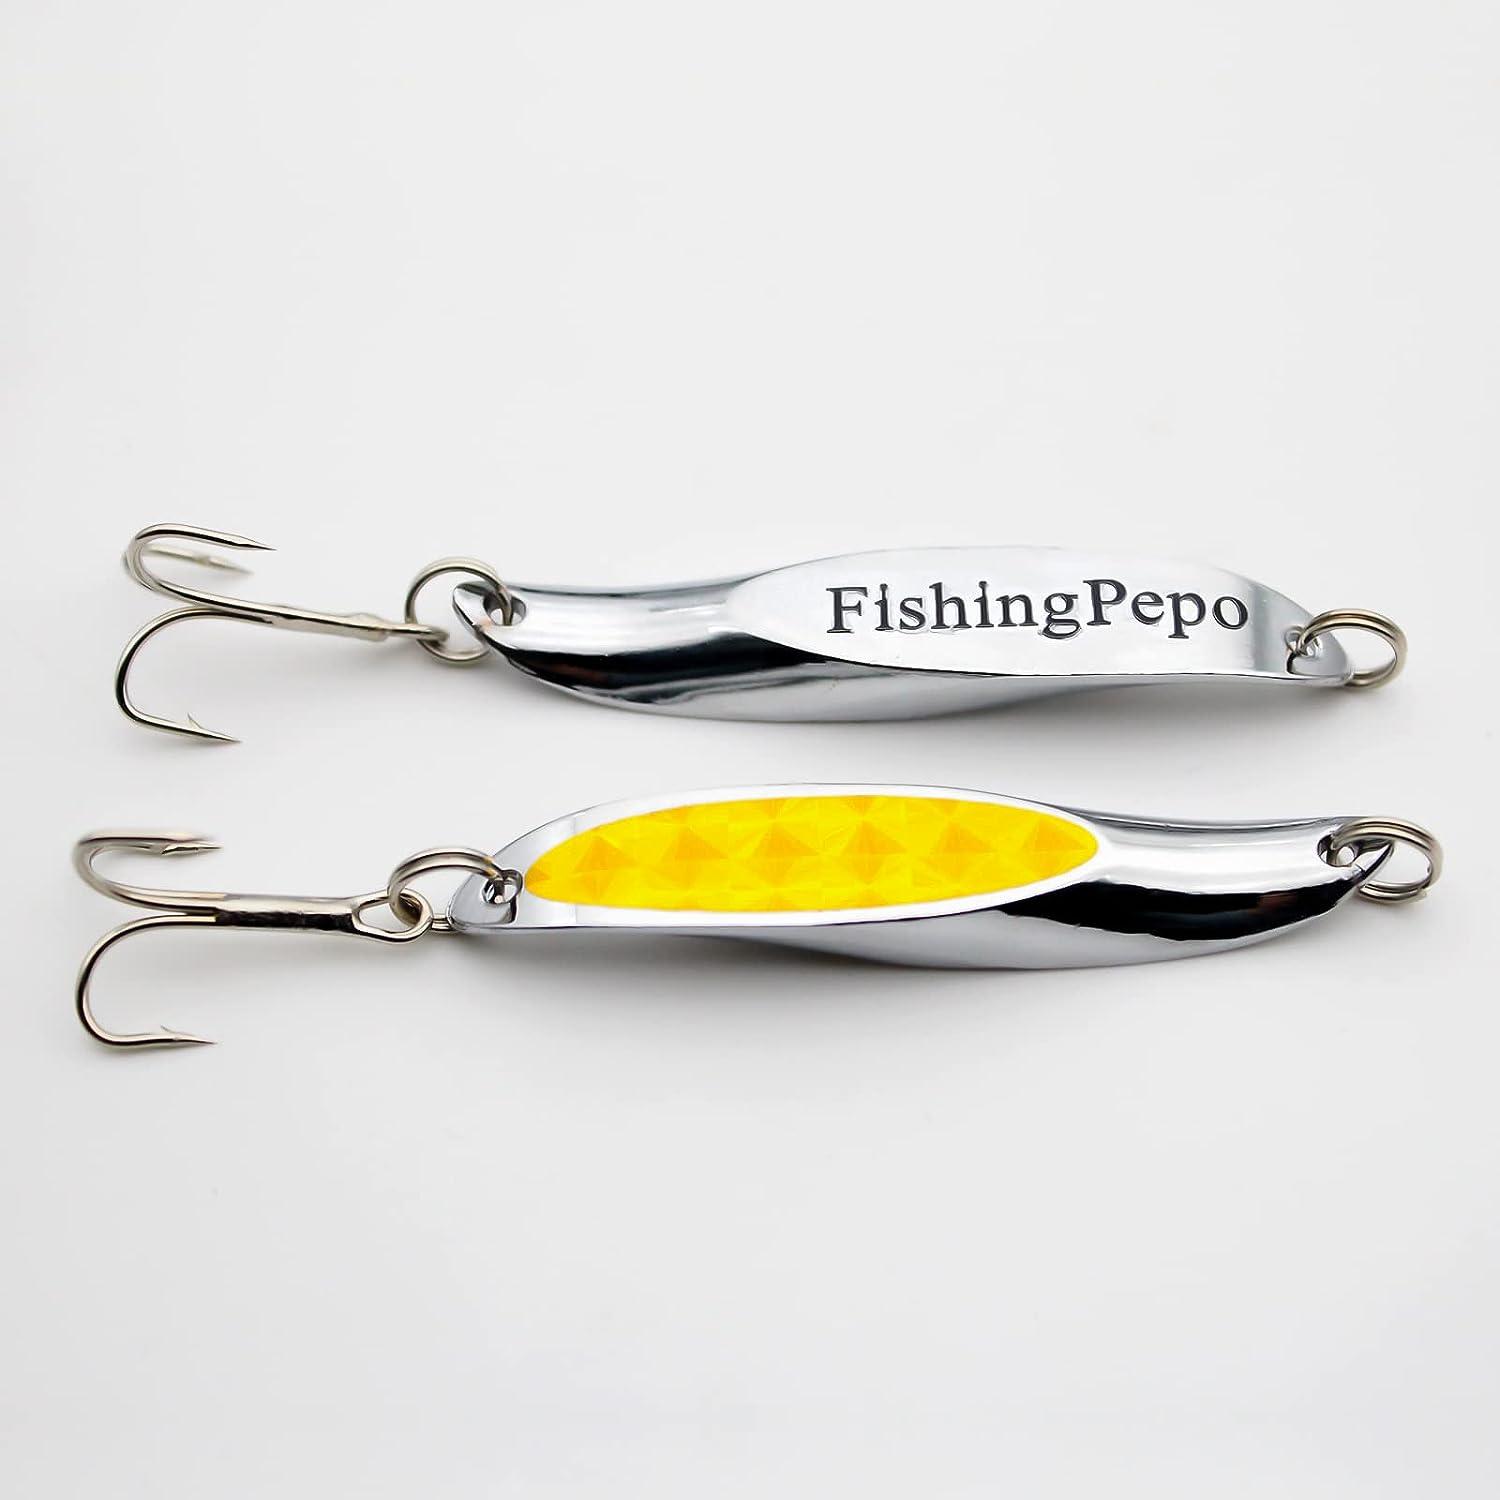 salmon lures, salmon lures Suppliers and Manufacturers at